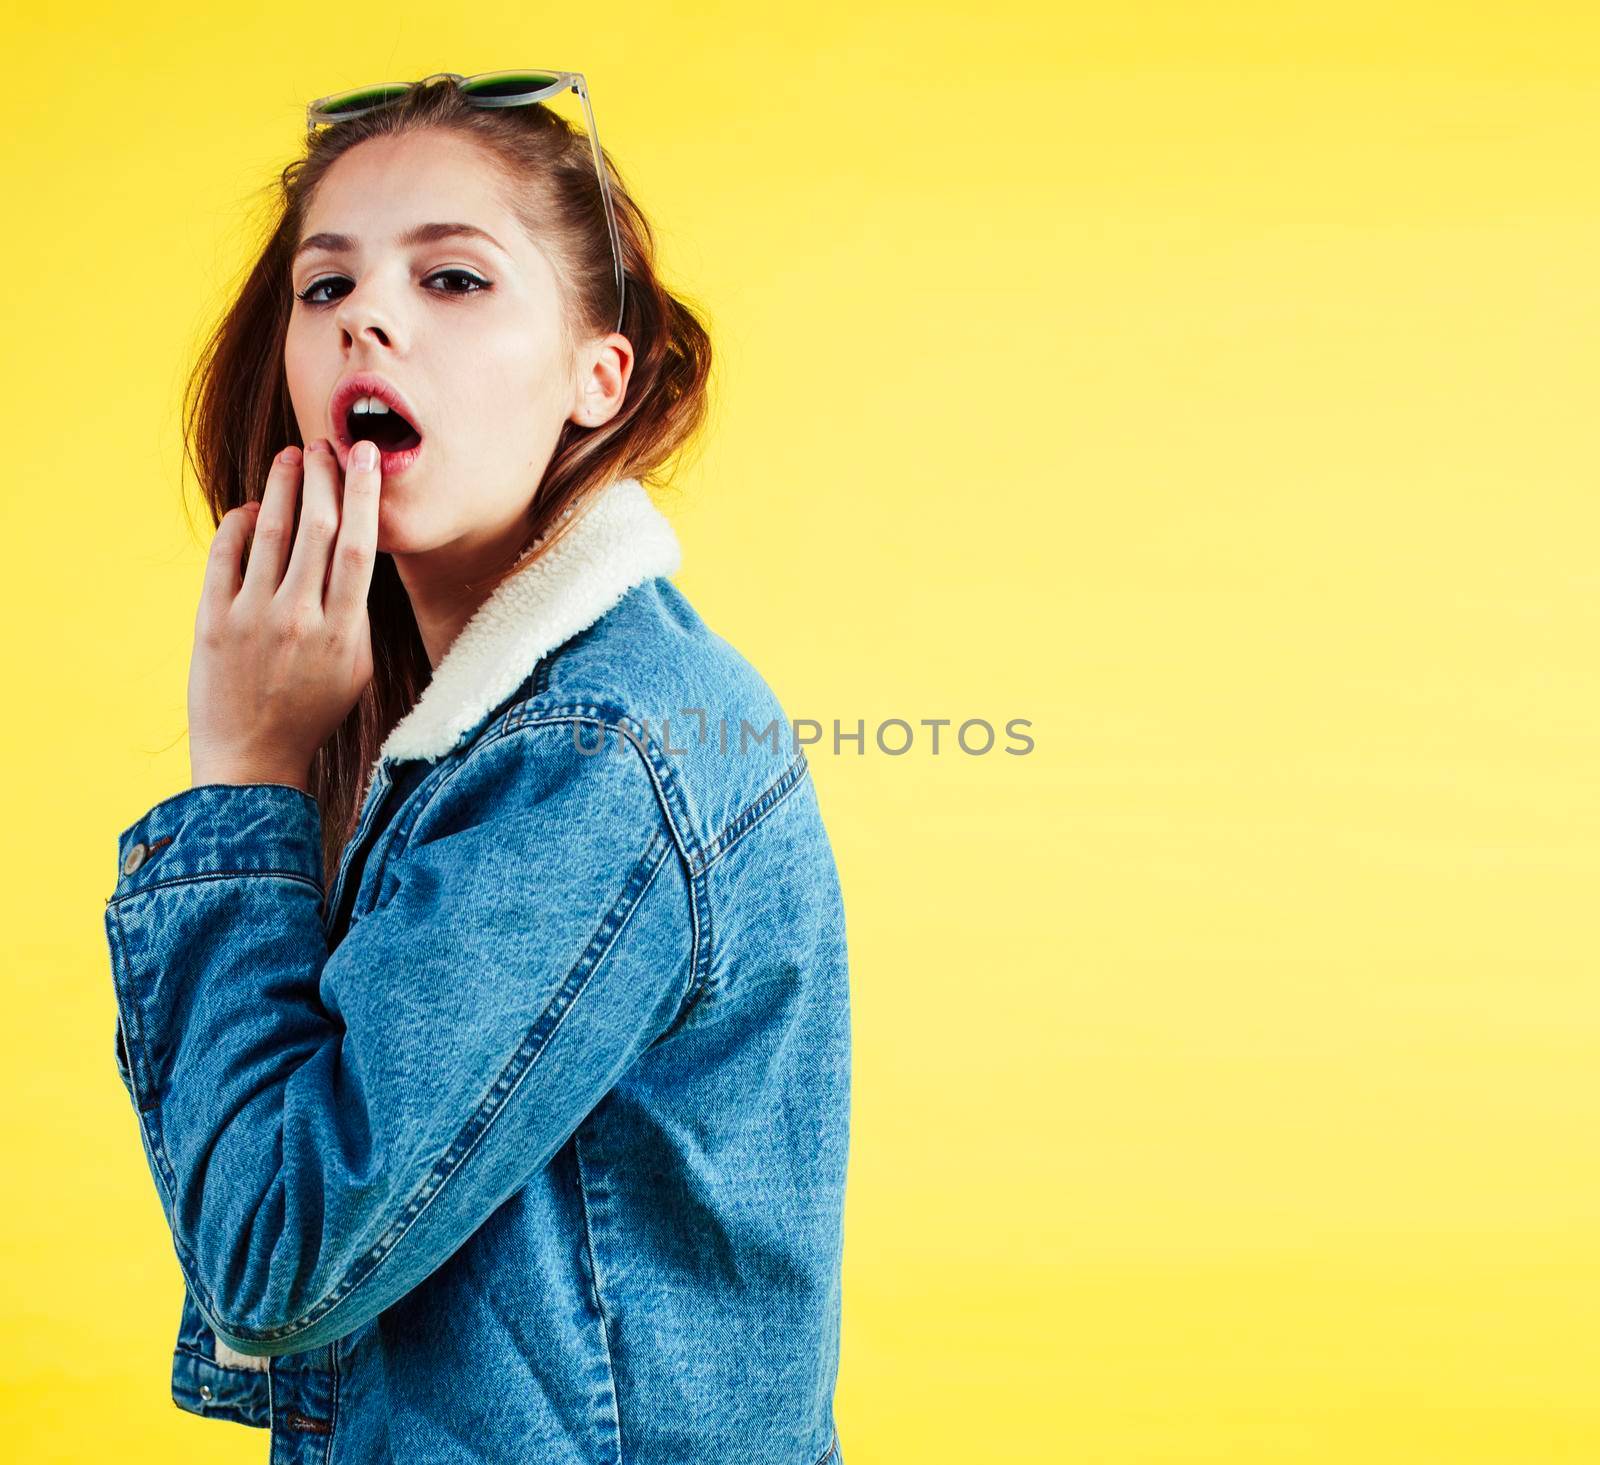 lifestyle people concept: pretty young school teenage girl having fun happy smiling on yellow background close up